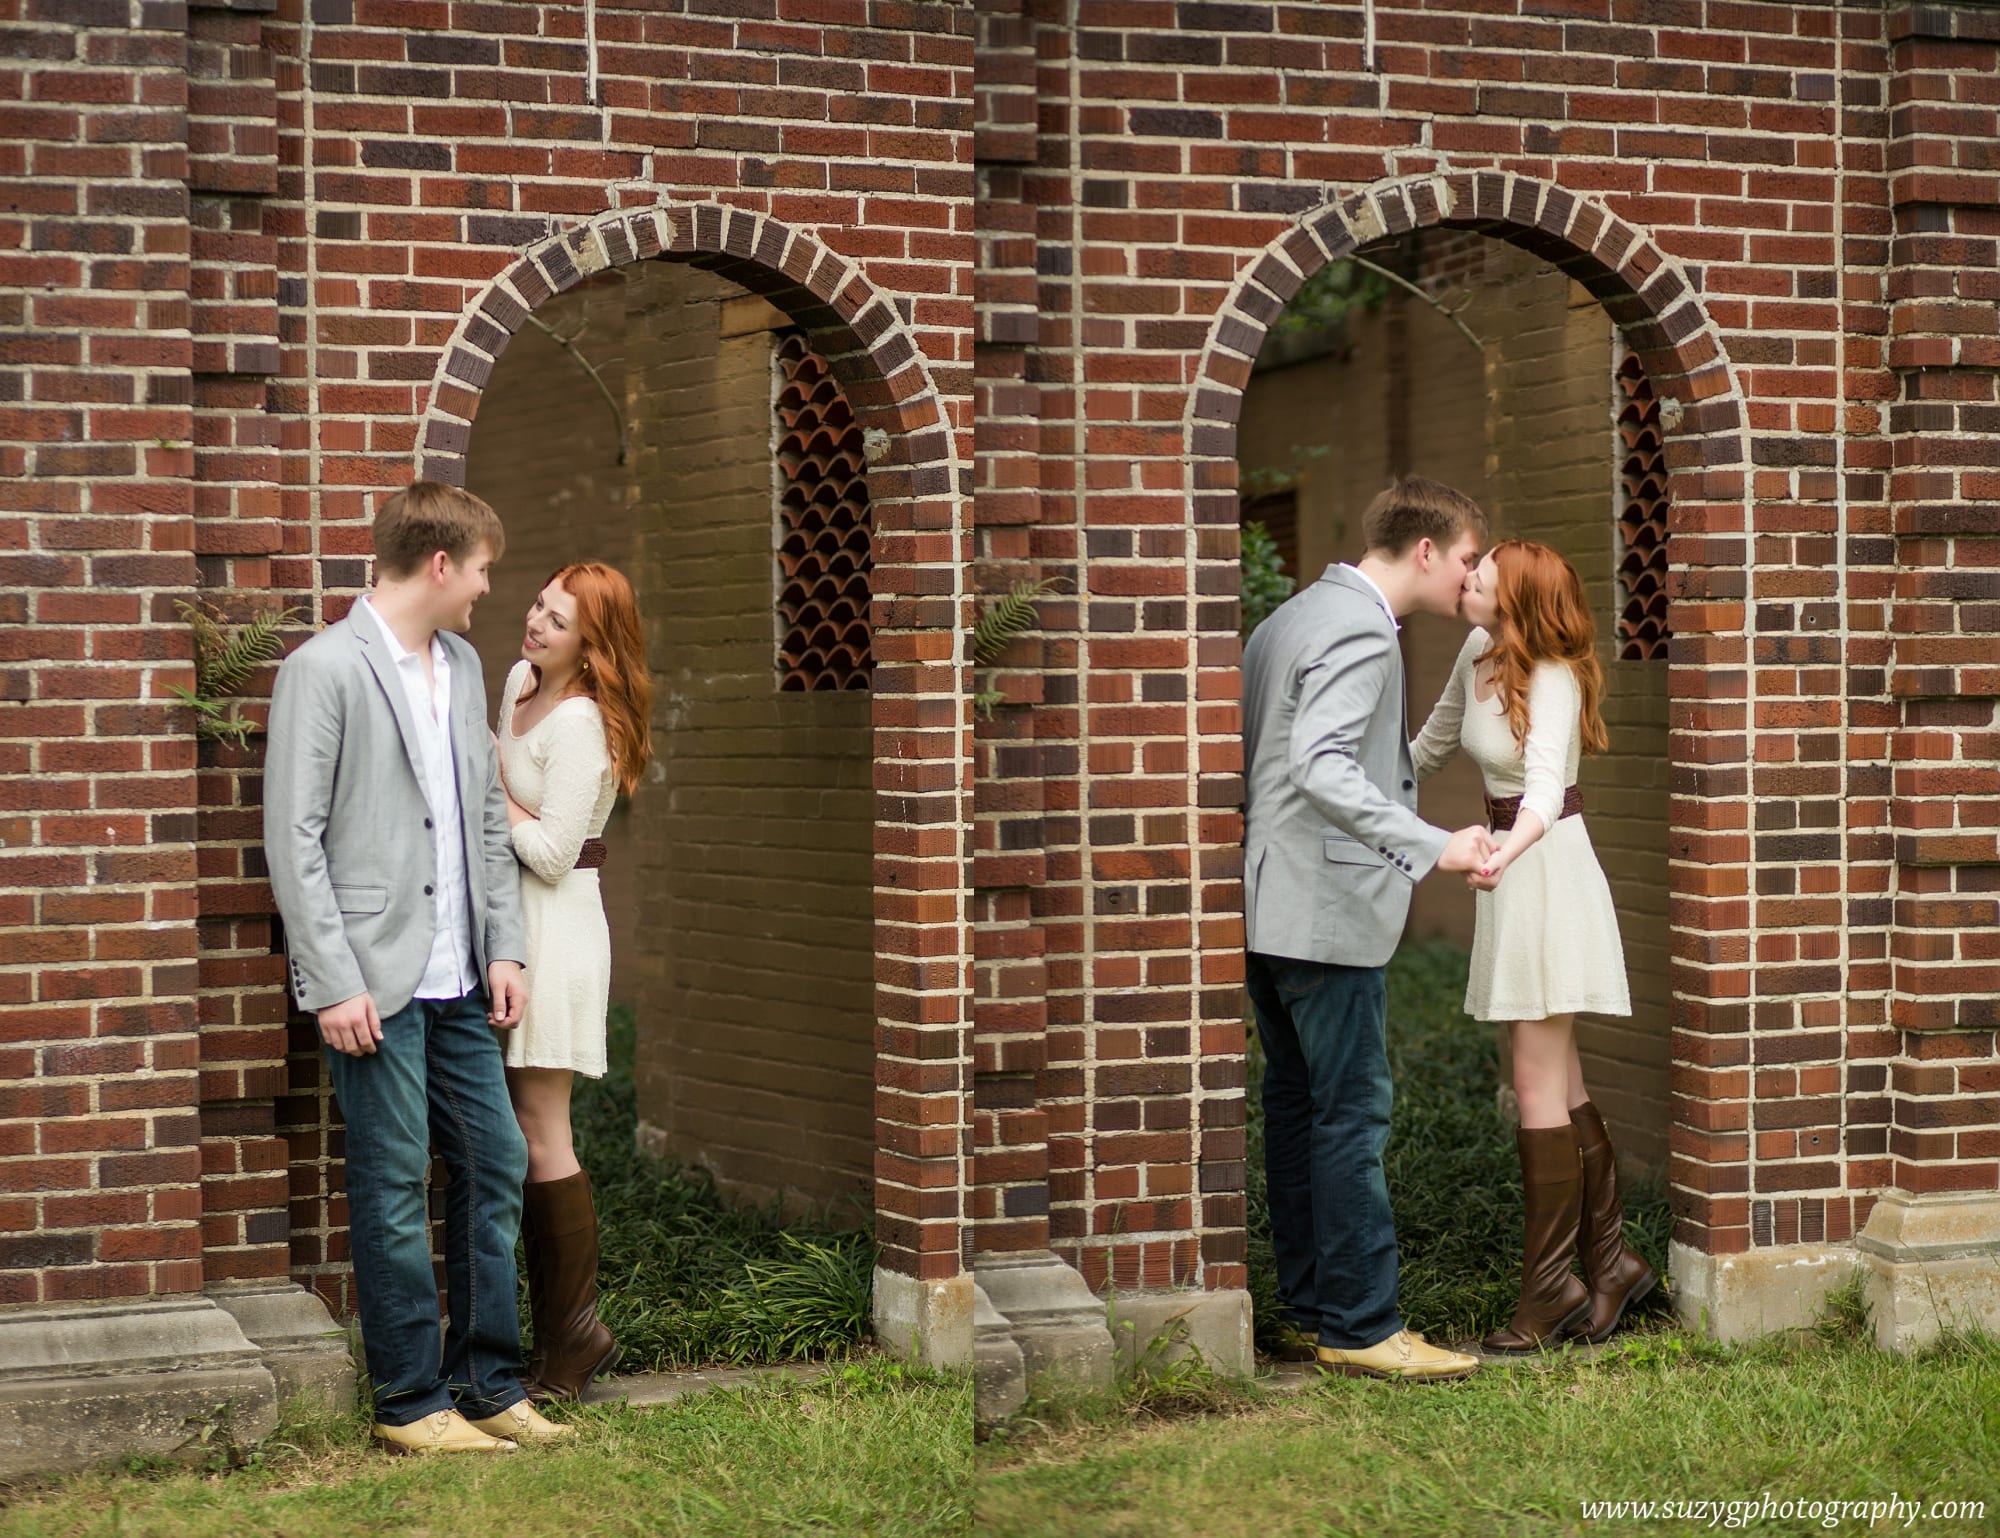 engagements-new orleans-texas-baton rouge-lake charles-suzy g-photography-suzygphotography_0127